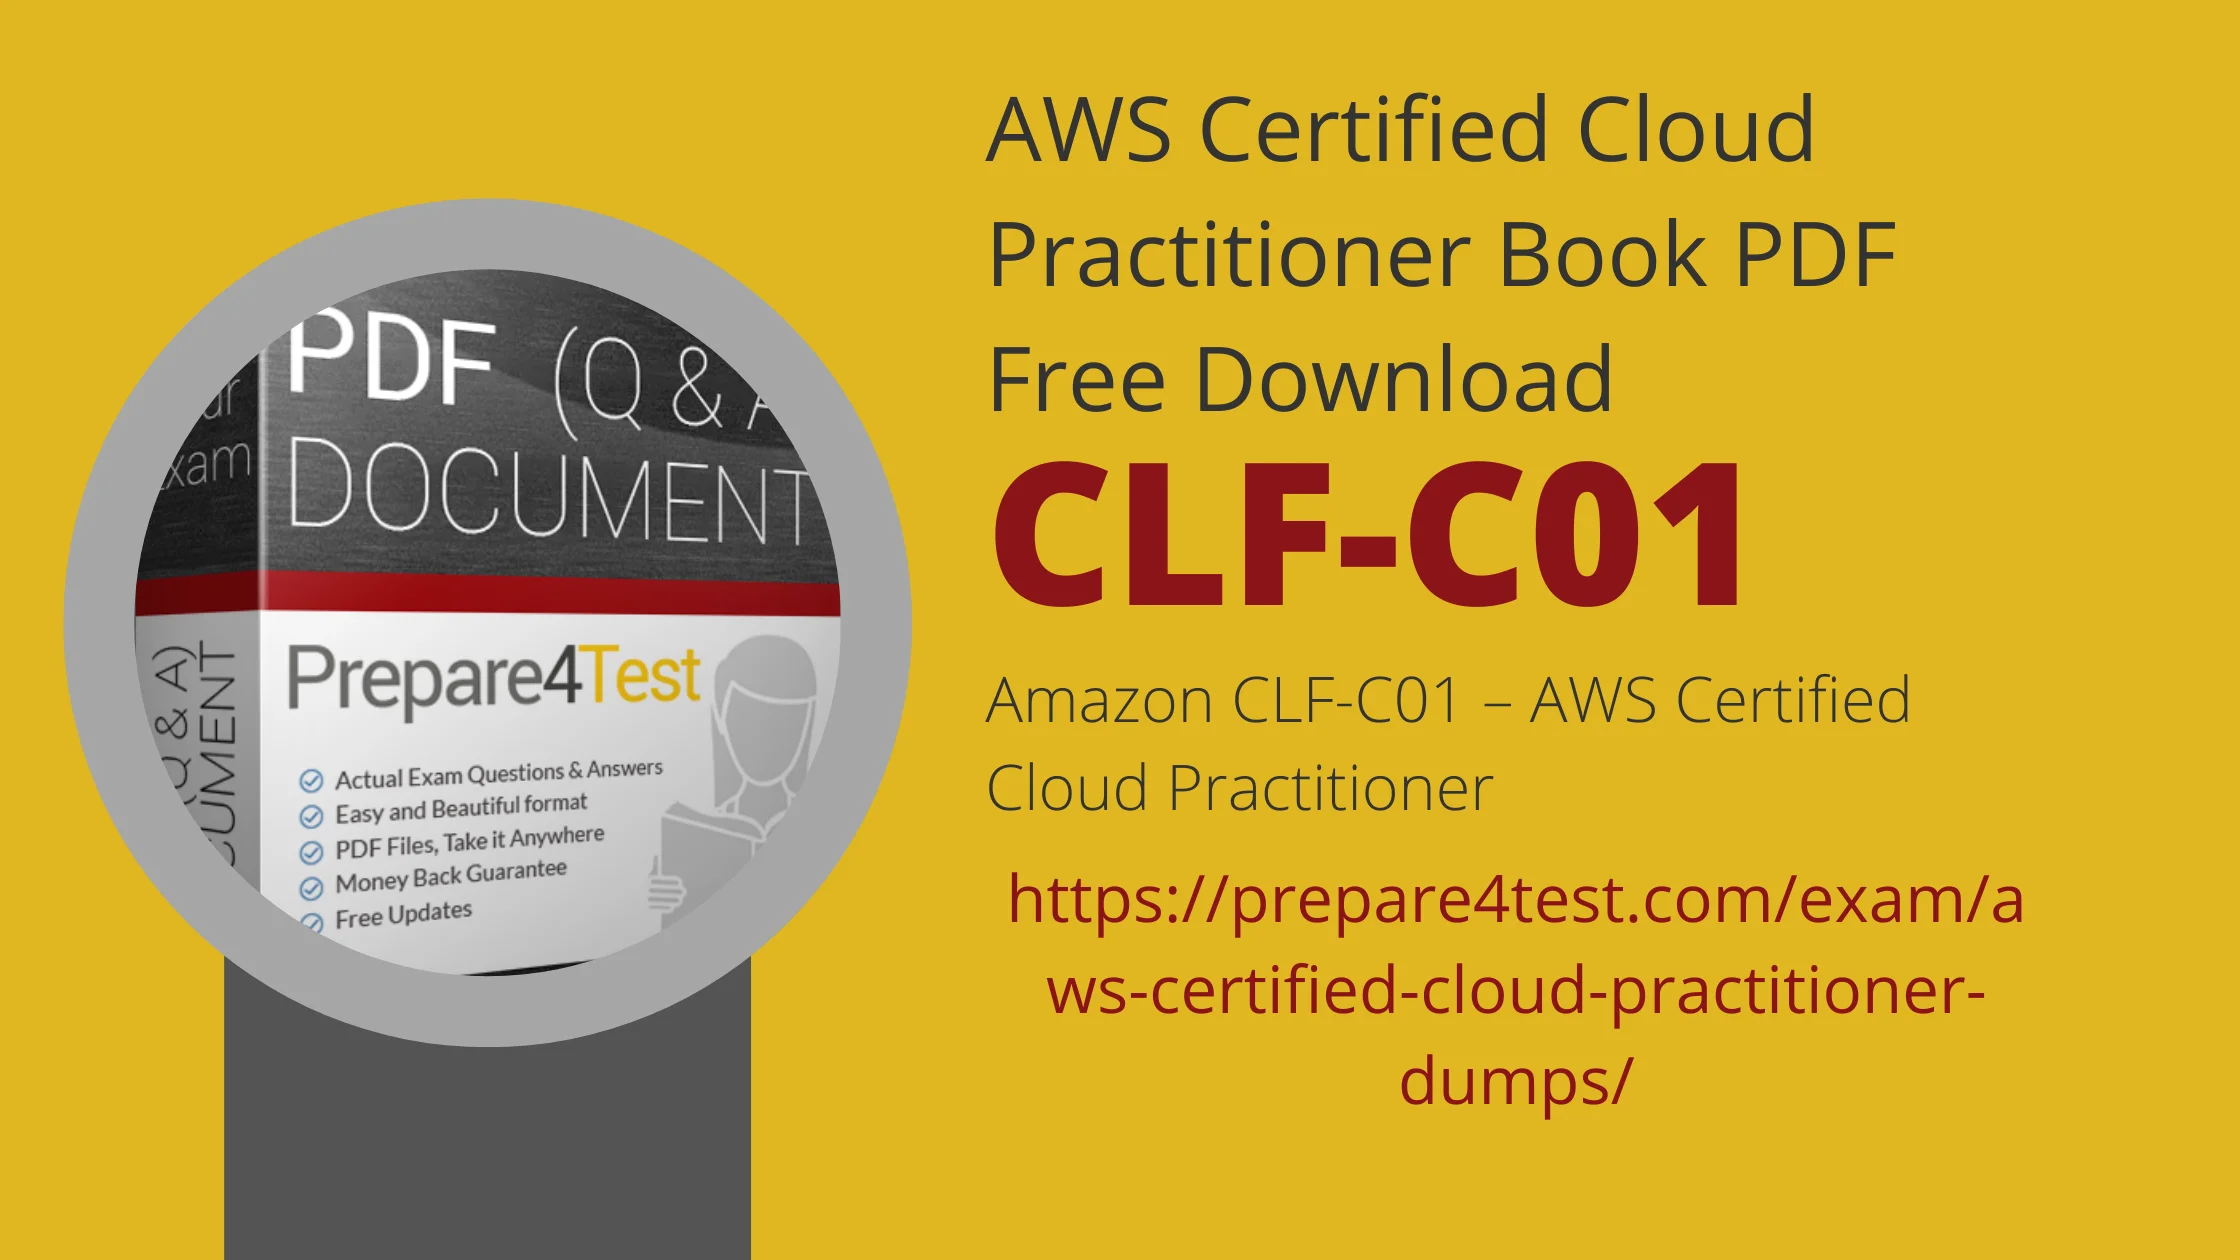 AWS Certified Cloud Practitioner Book PDF Free Download promotion